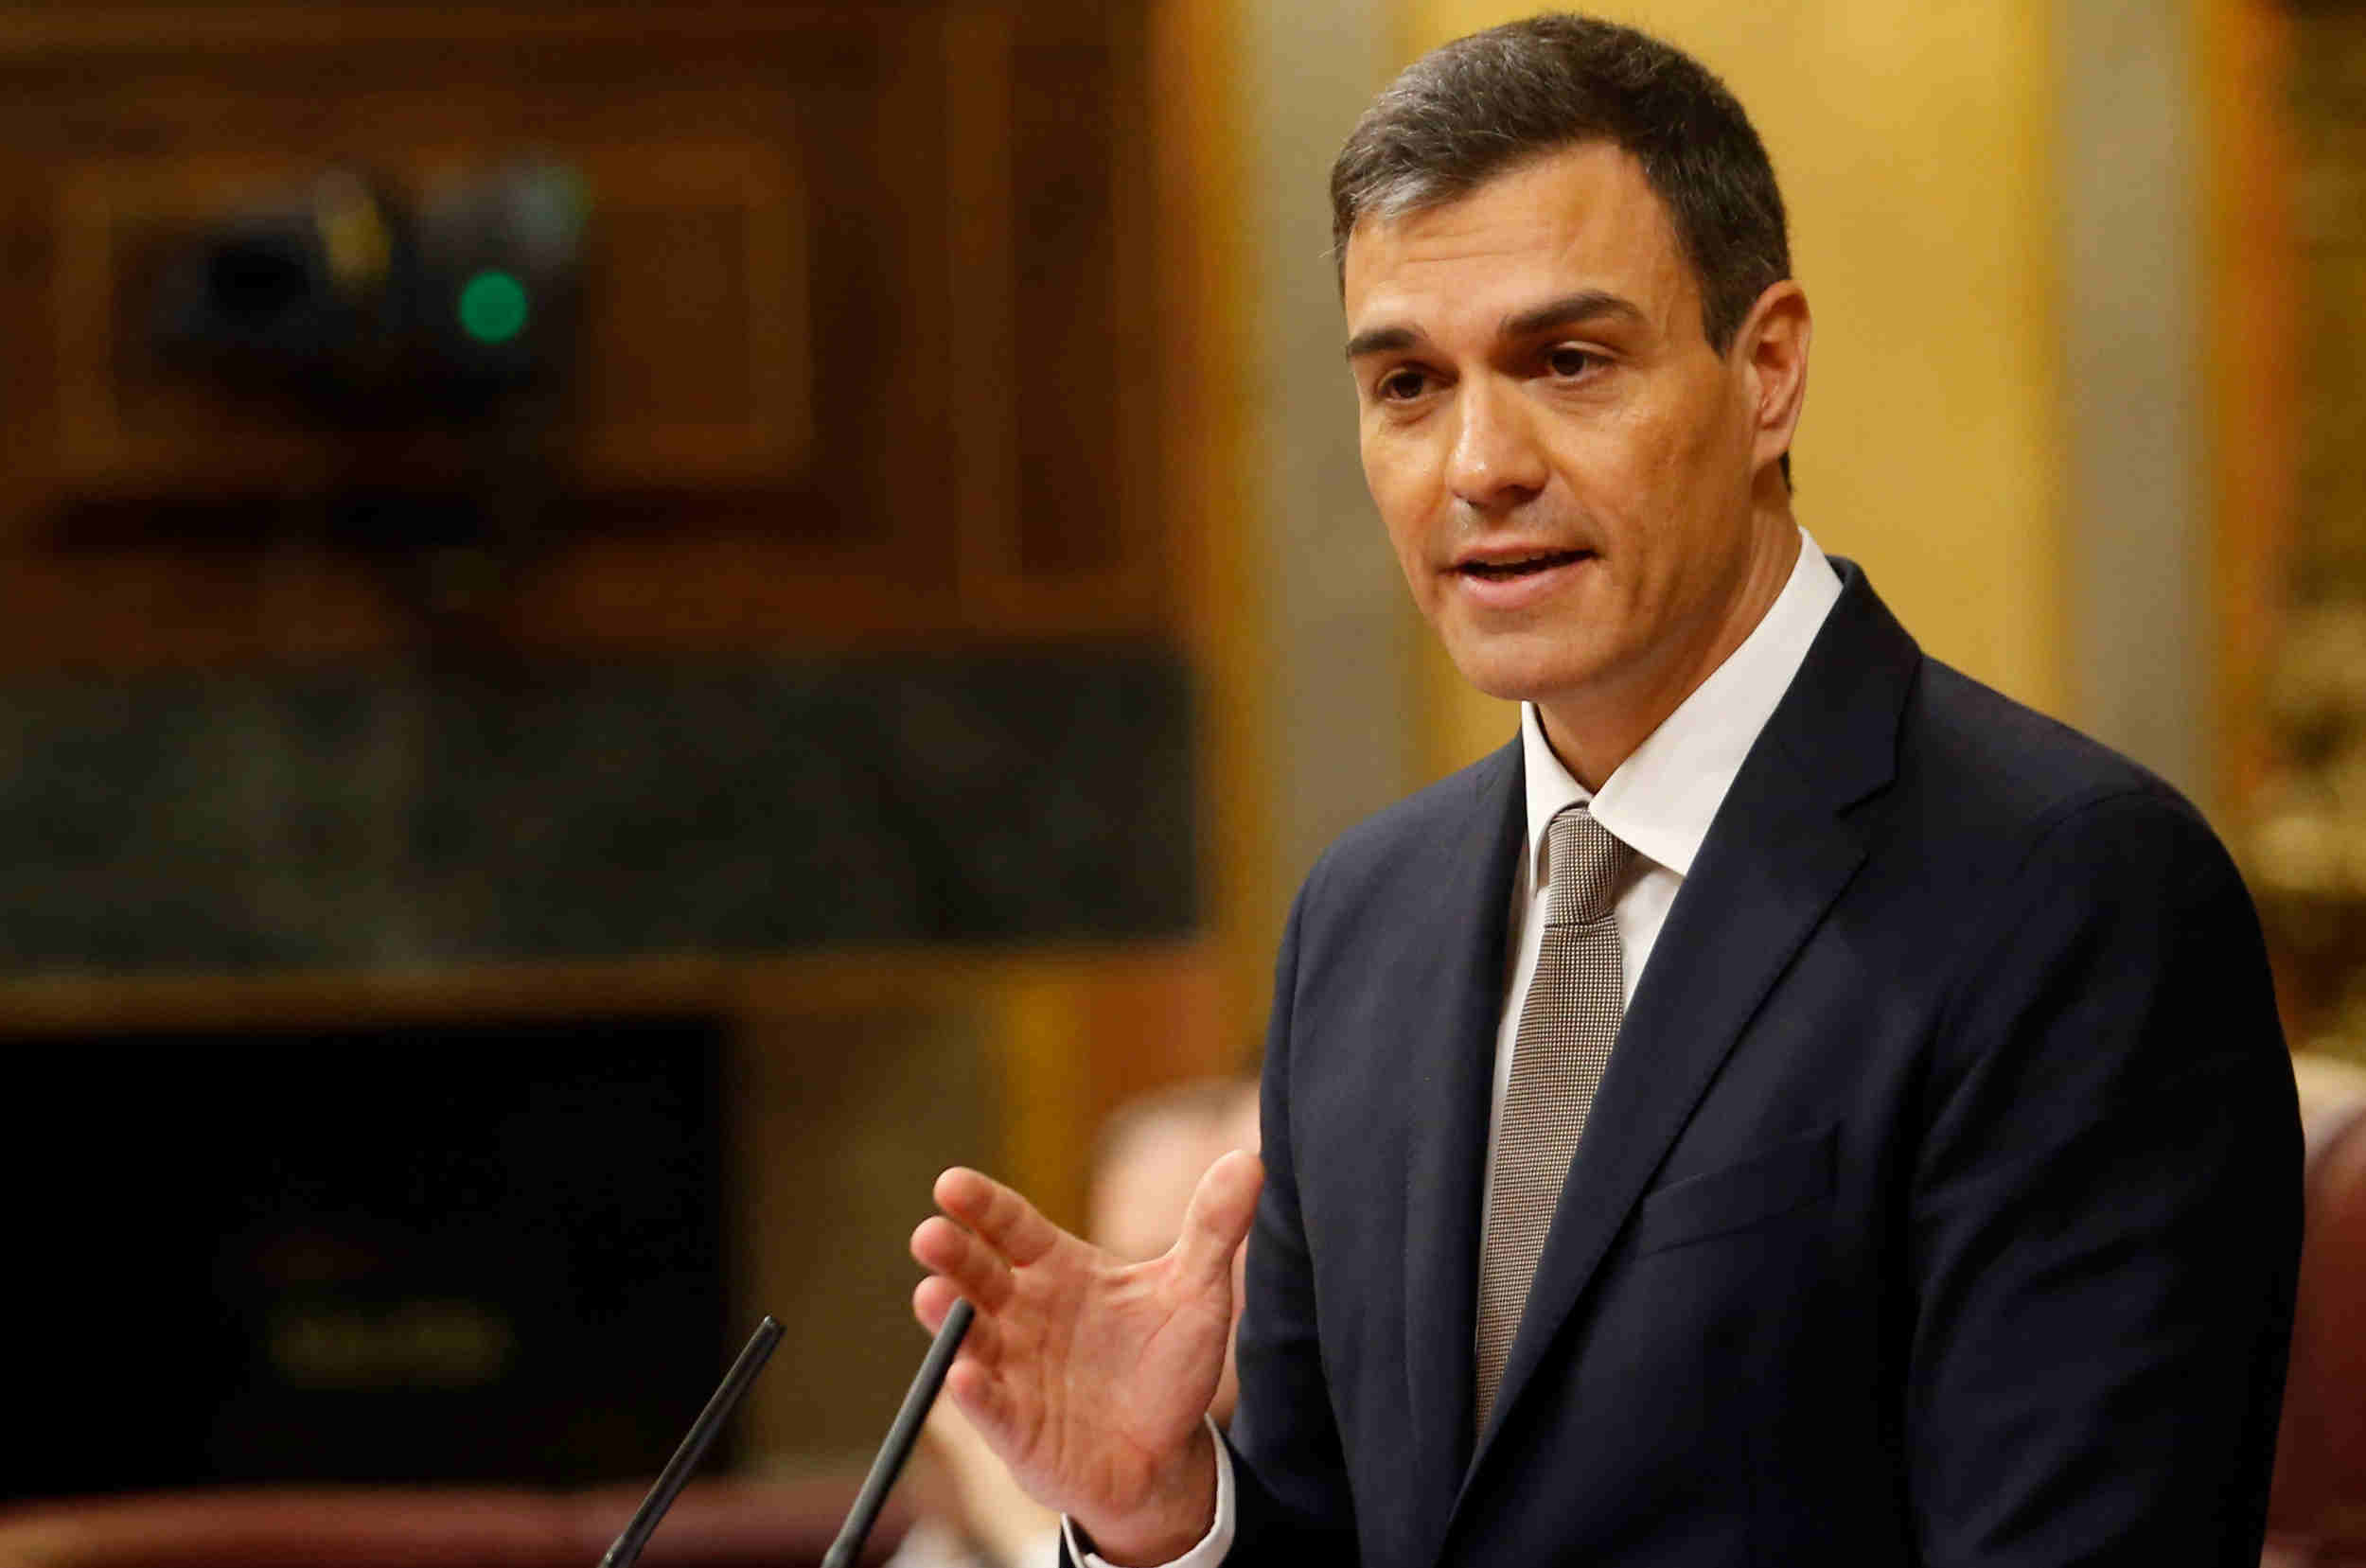 Socialist leader Pedro Sánchez in parliament (by Javier Barbancho)